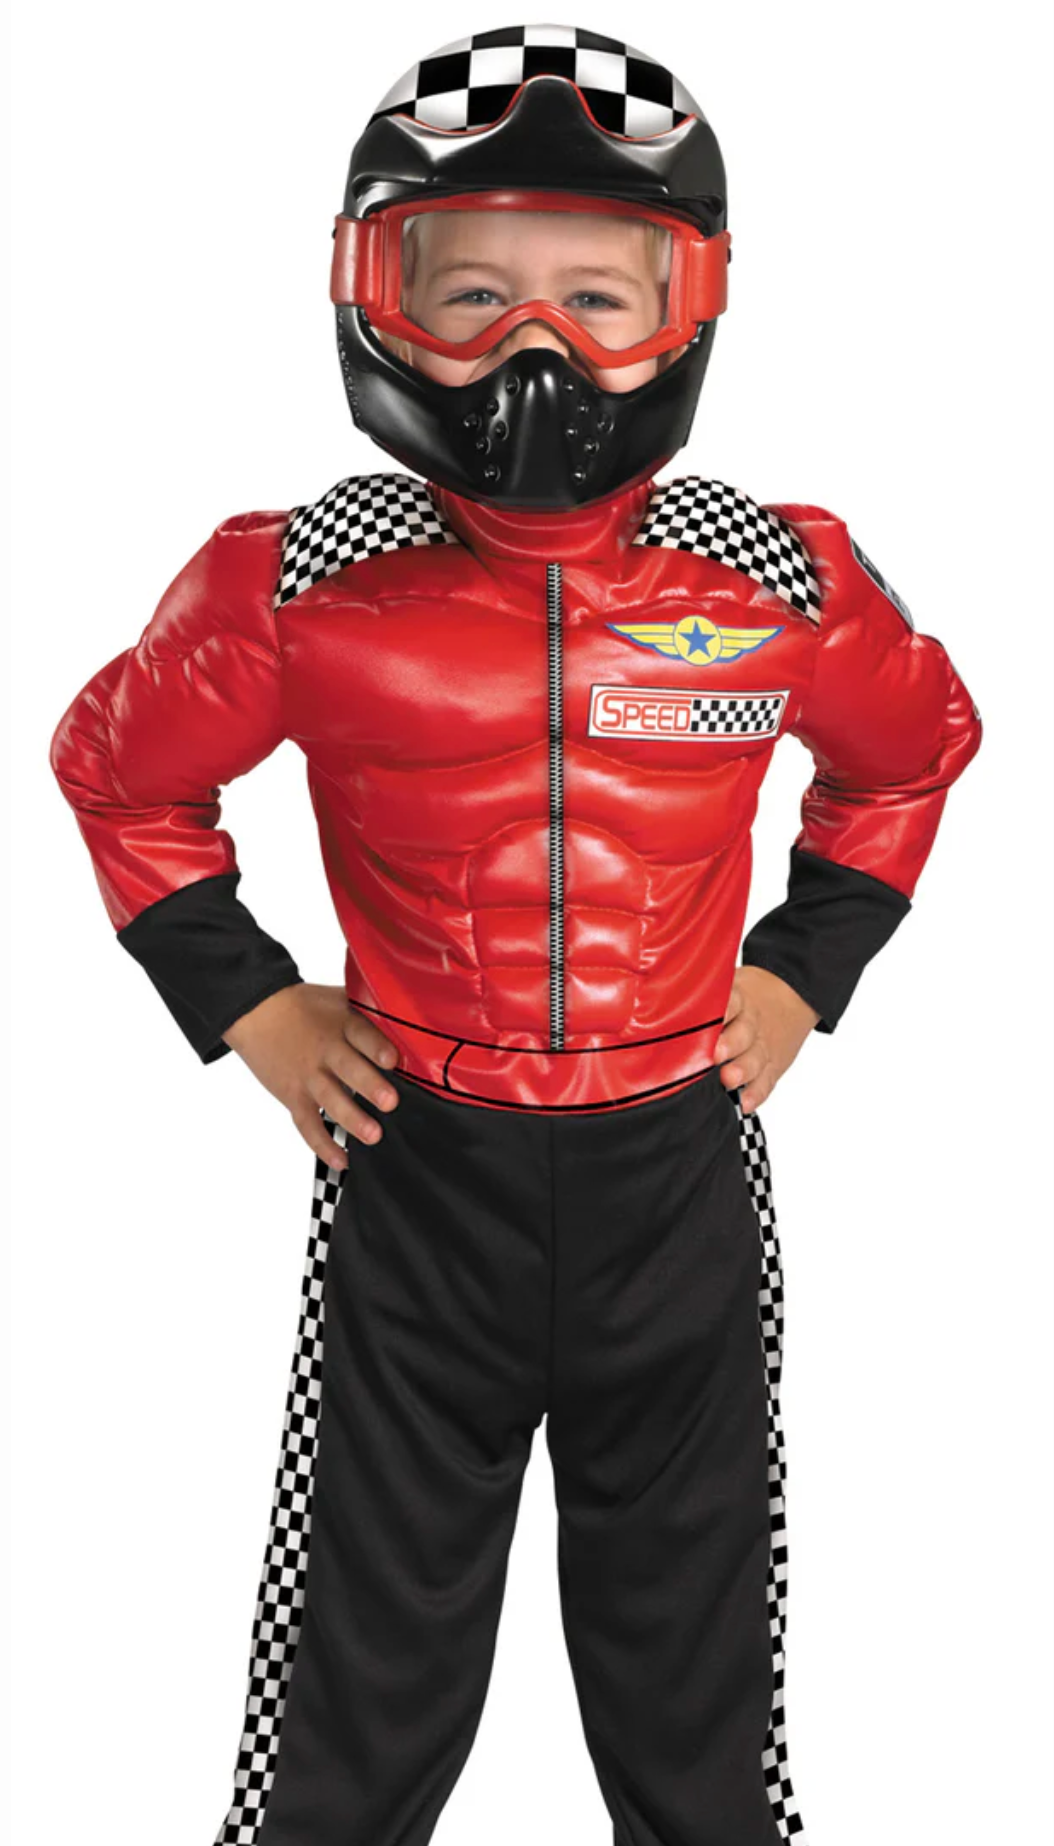 Turbo Race Car Driver Toddler Costume